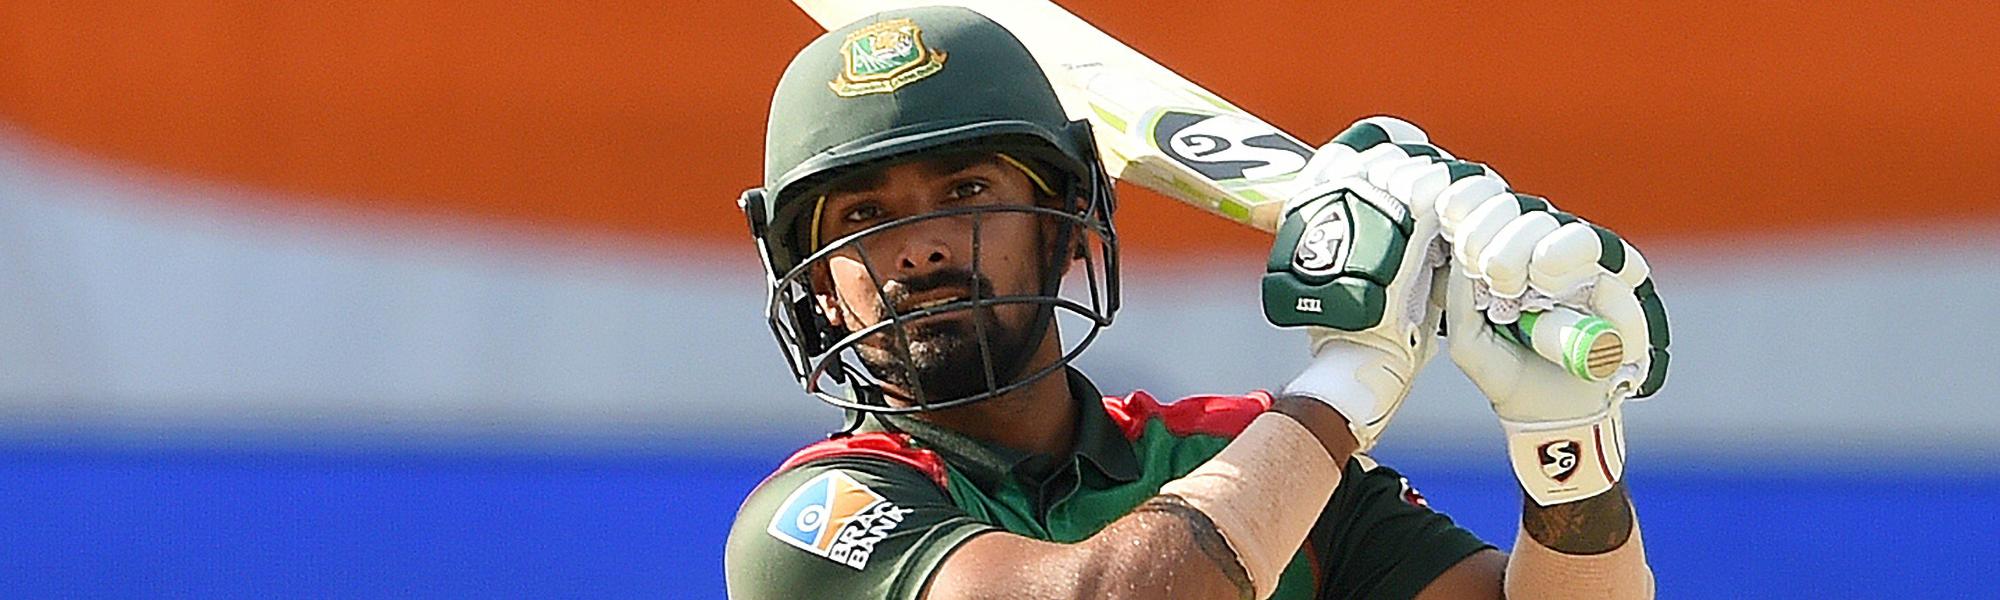 After Asia Cup heroics, Liton Das is aiming for greater consistency